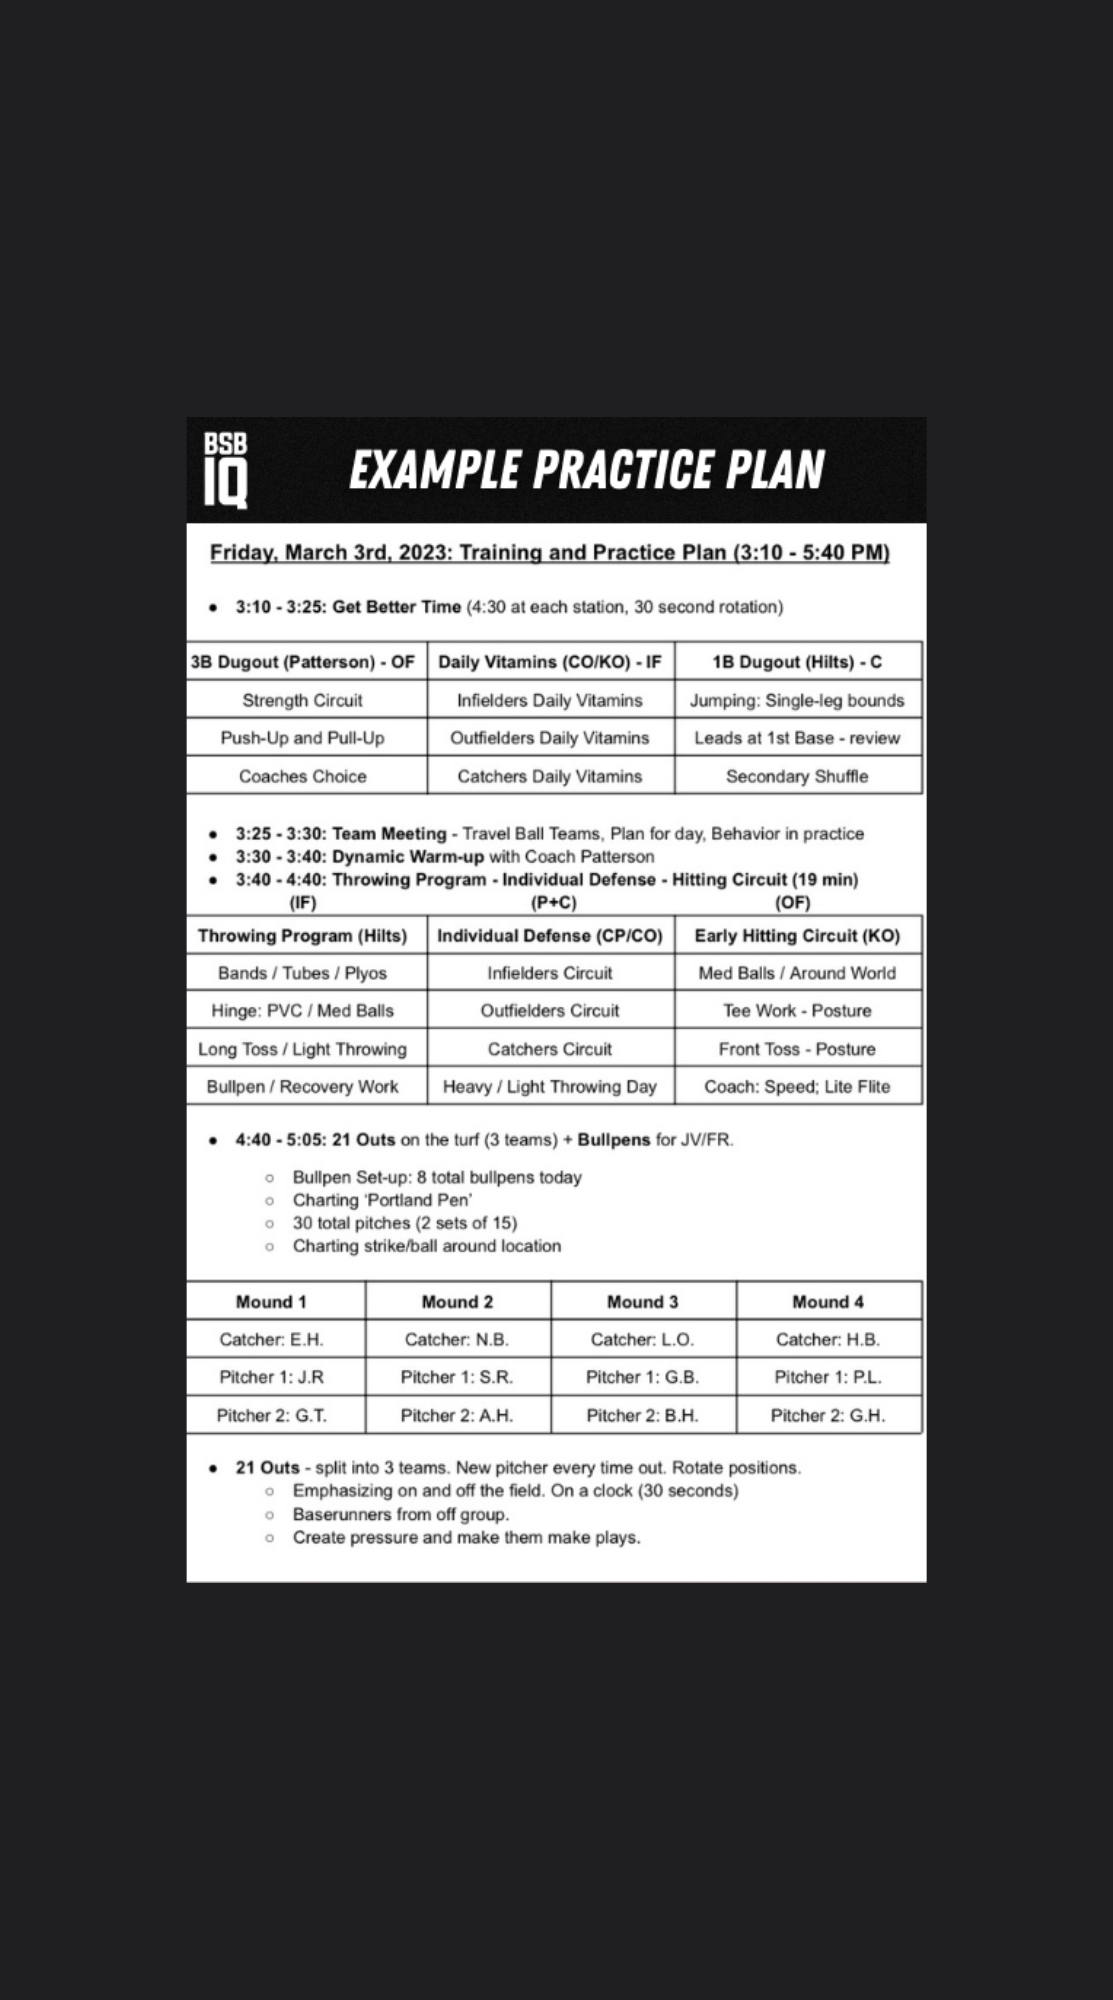 A Guide To Effective Practice Planning